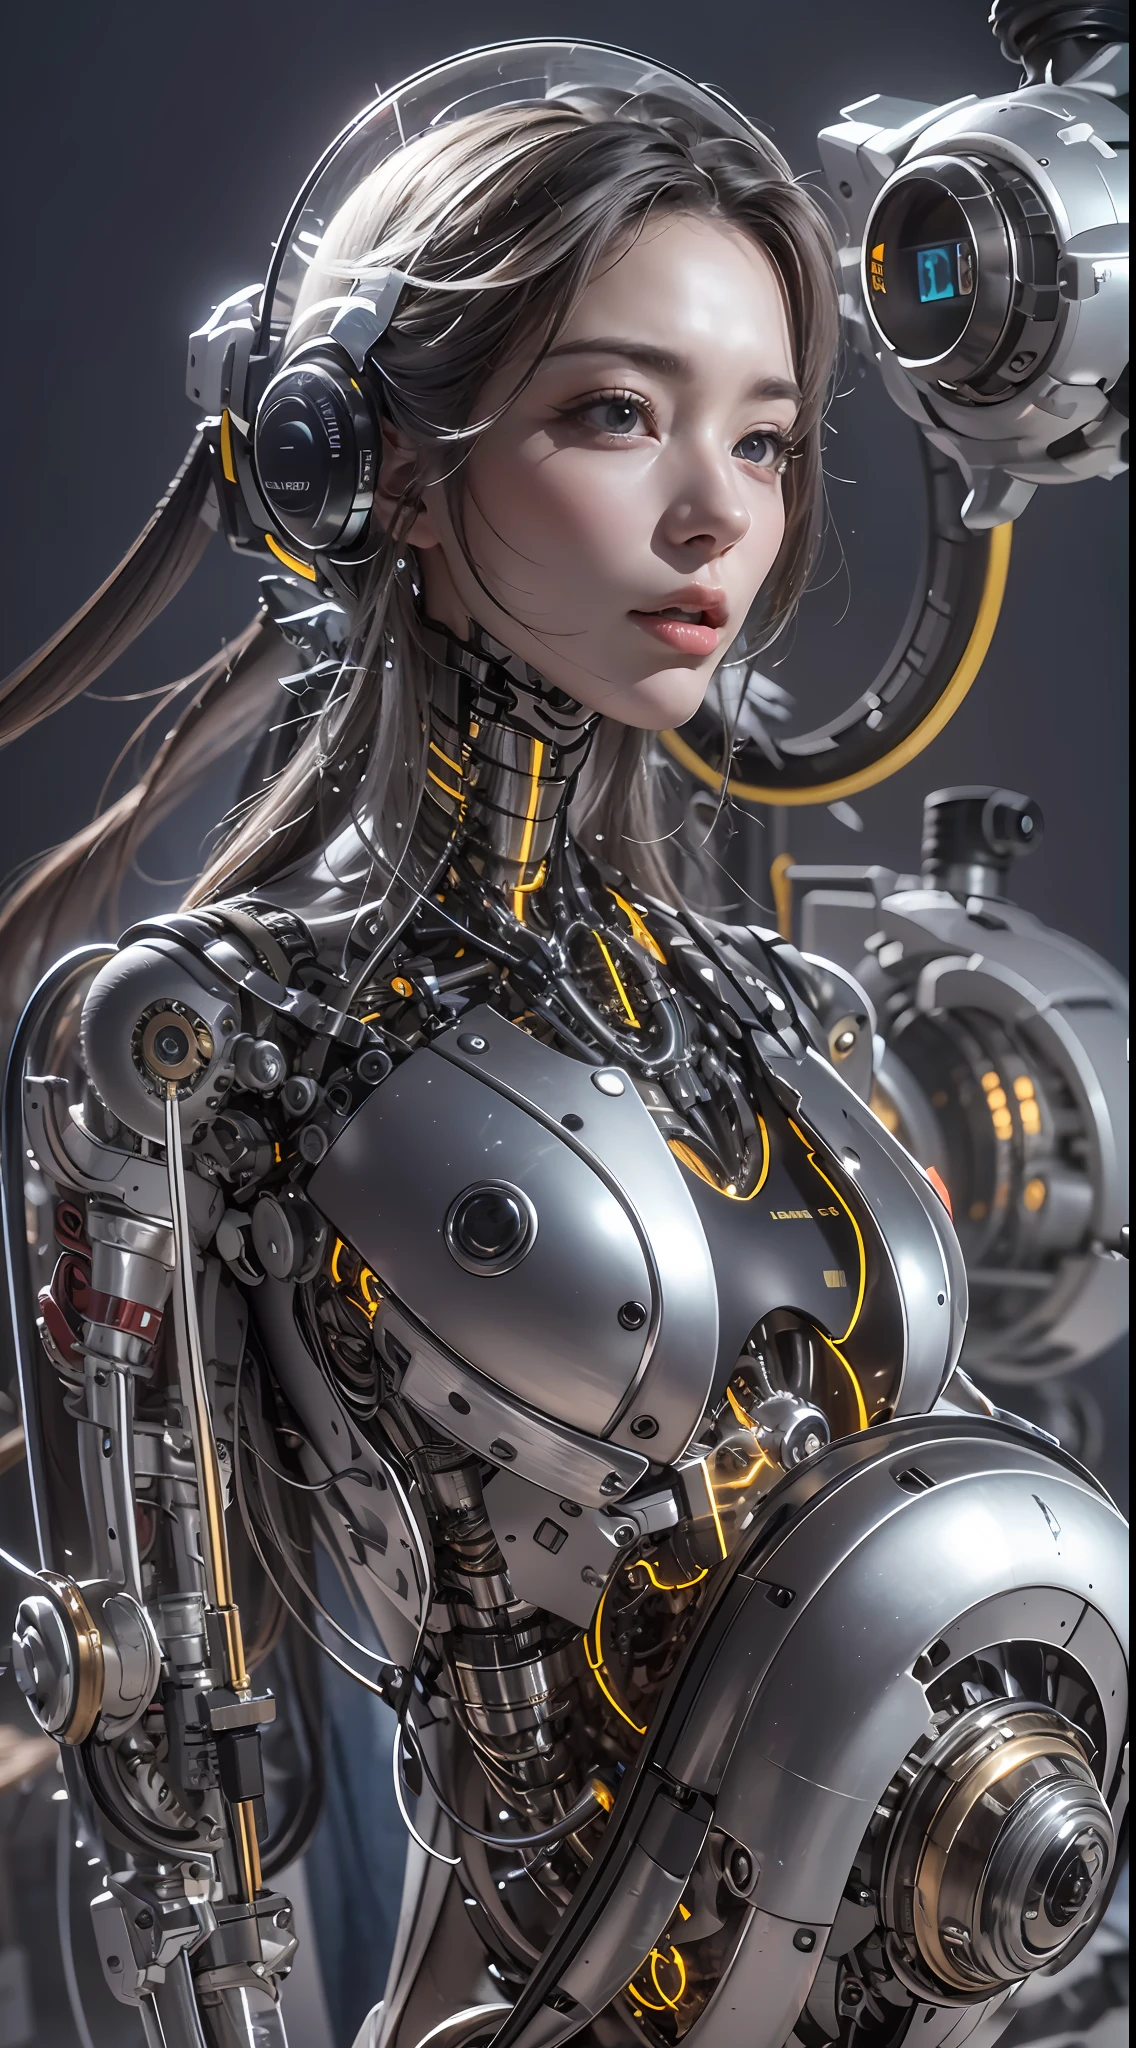 best qualtiy， tmasterpiece， Ultra-high resolution， Rendered with camera-like realism， real photograph，(((( A mechanical girl))))，((独奏))，(((full bodyesbian))),((Perfect facial features，delicated face))，((Clean face))，((There is nothing else on the face))， highly realistically detailed， Panoramic lighting effects， Fine and accurate shading representation， rendering by octane， 8K resolution， Reveal vivid skin details， Representation of metallic materials， Depicting vacuum tubes、Liquid tubes、oil pressure gauges、glass tubes、Simulate details such as meters， Highlight the details of the gears，  realism light effect， Face the audience's gaze，Mechanical components， The mechanical spine is attached to the back， Mechanical attachment attached to the neck，